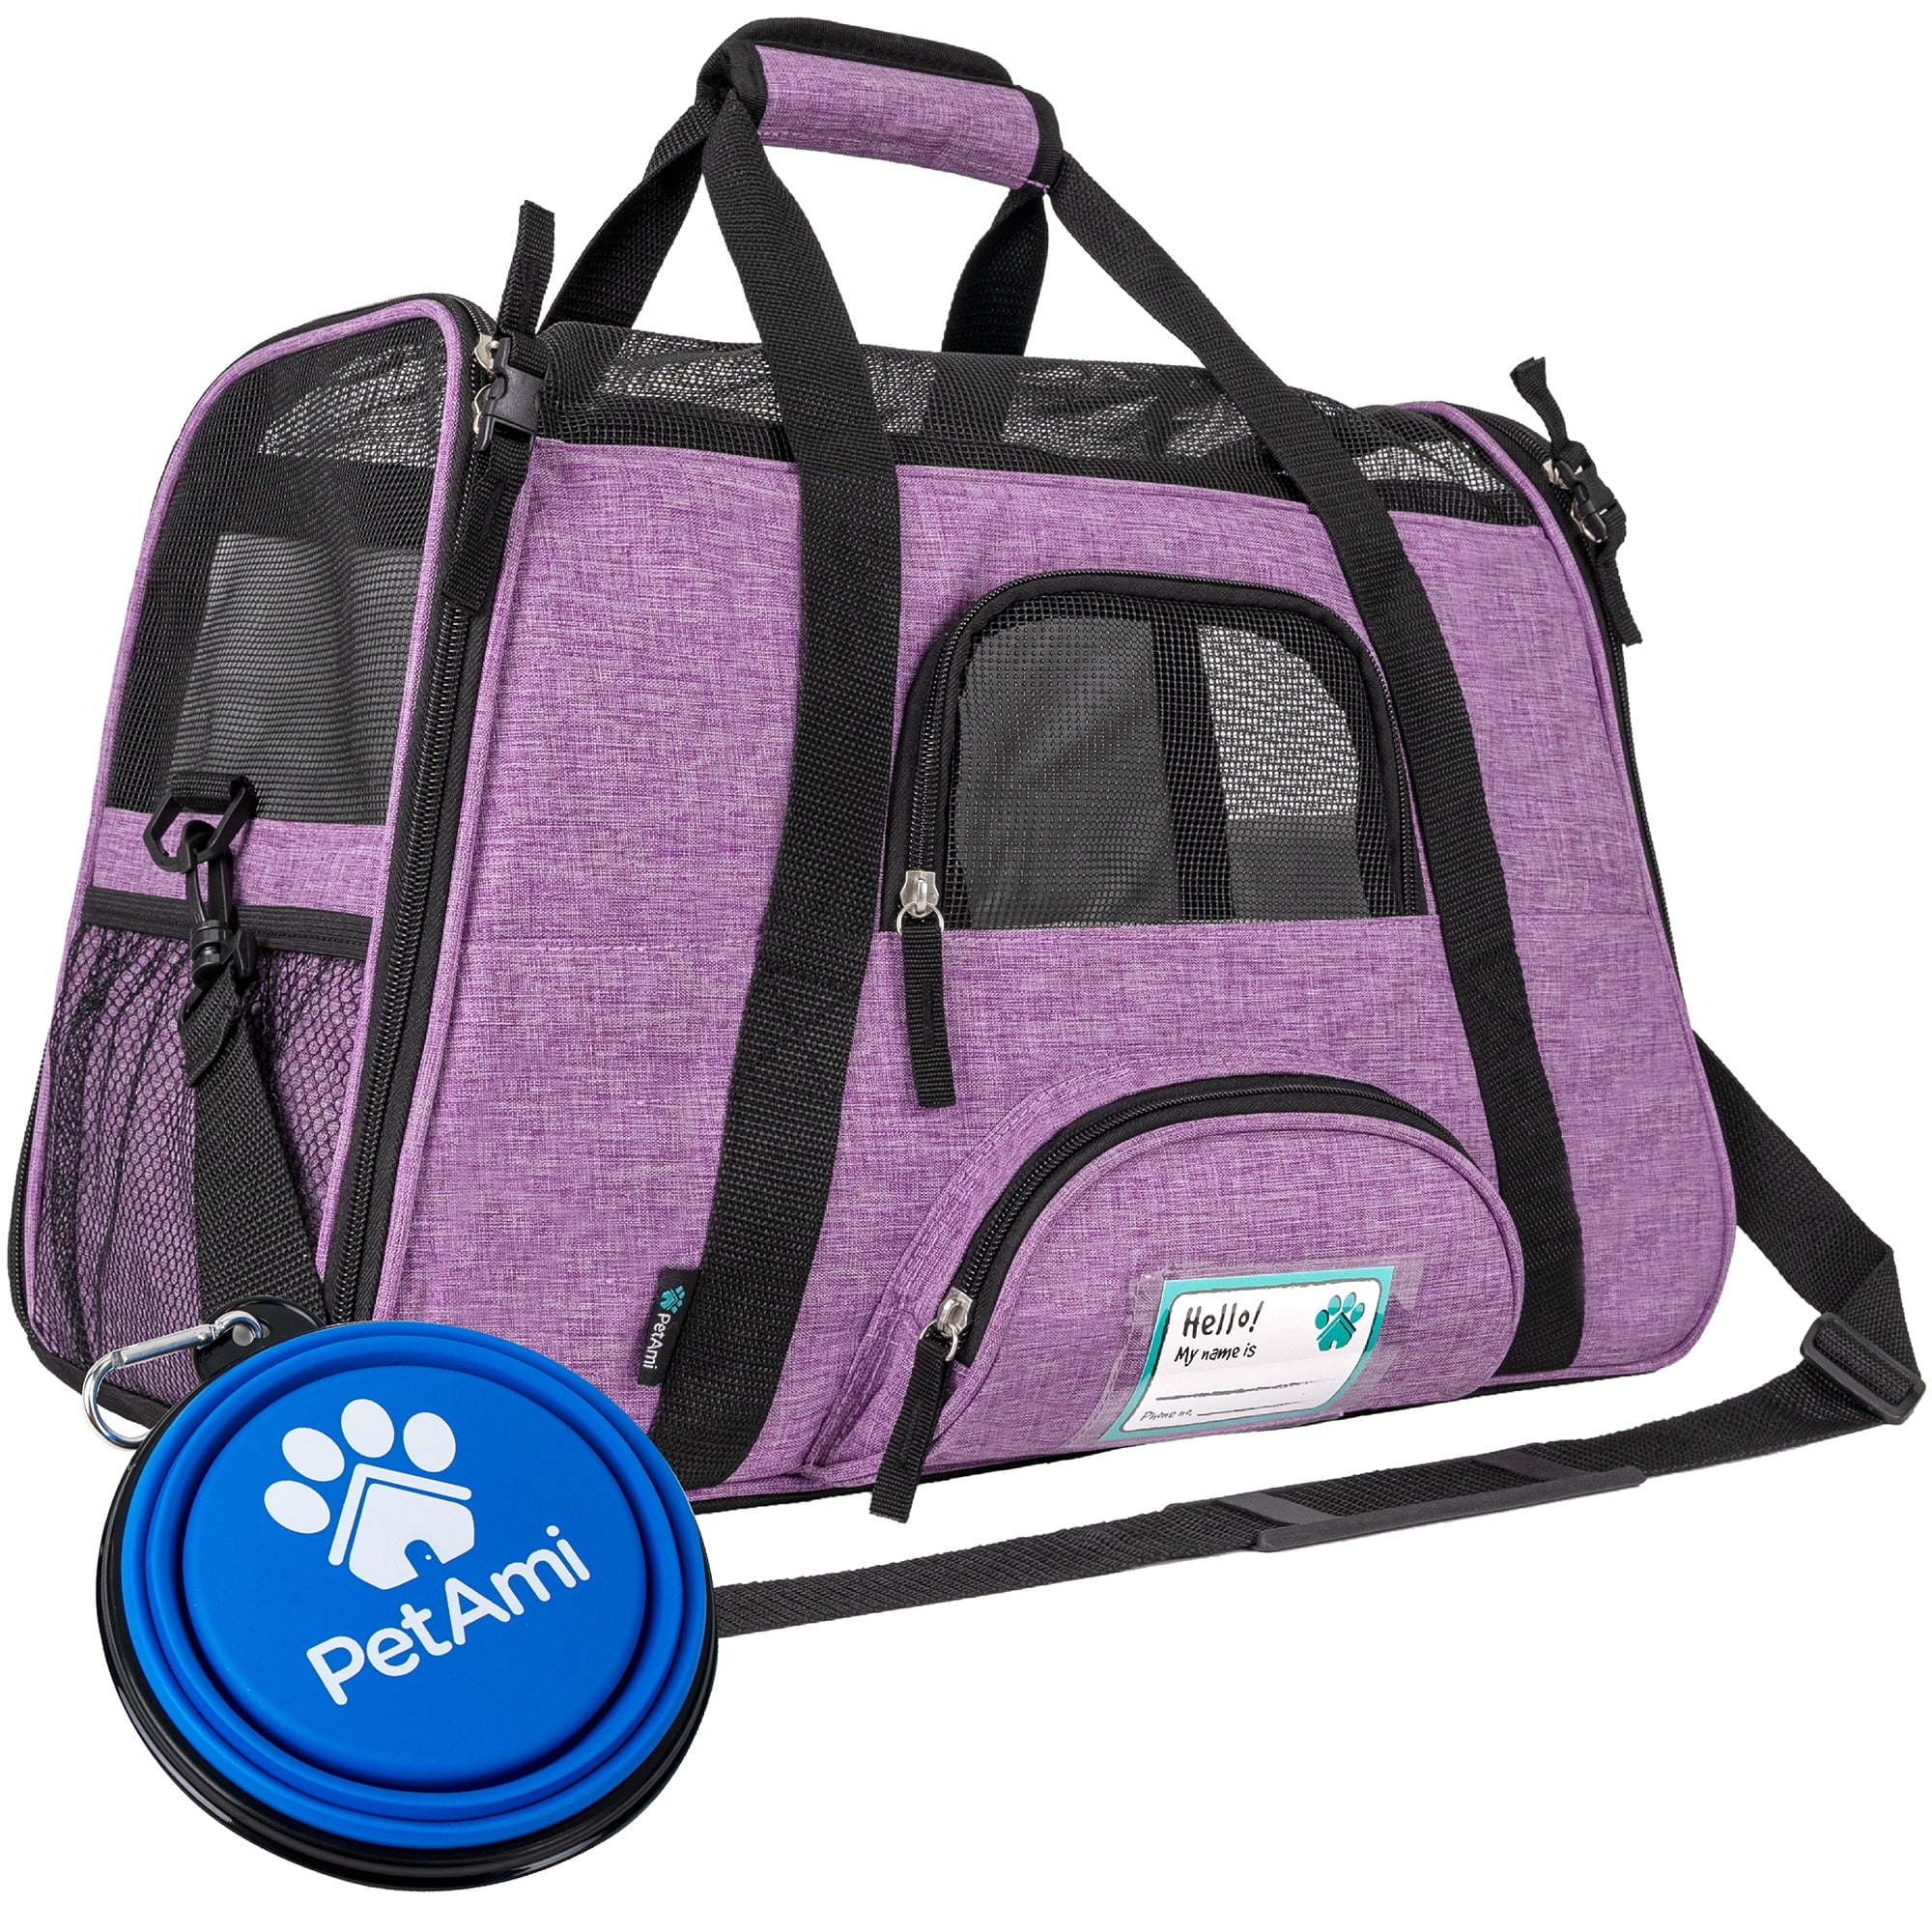 Pet Life 17.8-in x 11.1-in x 13.7-in Purple Collapsible Soft Shell